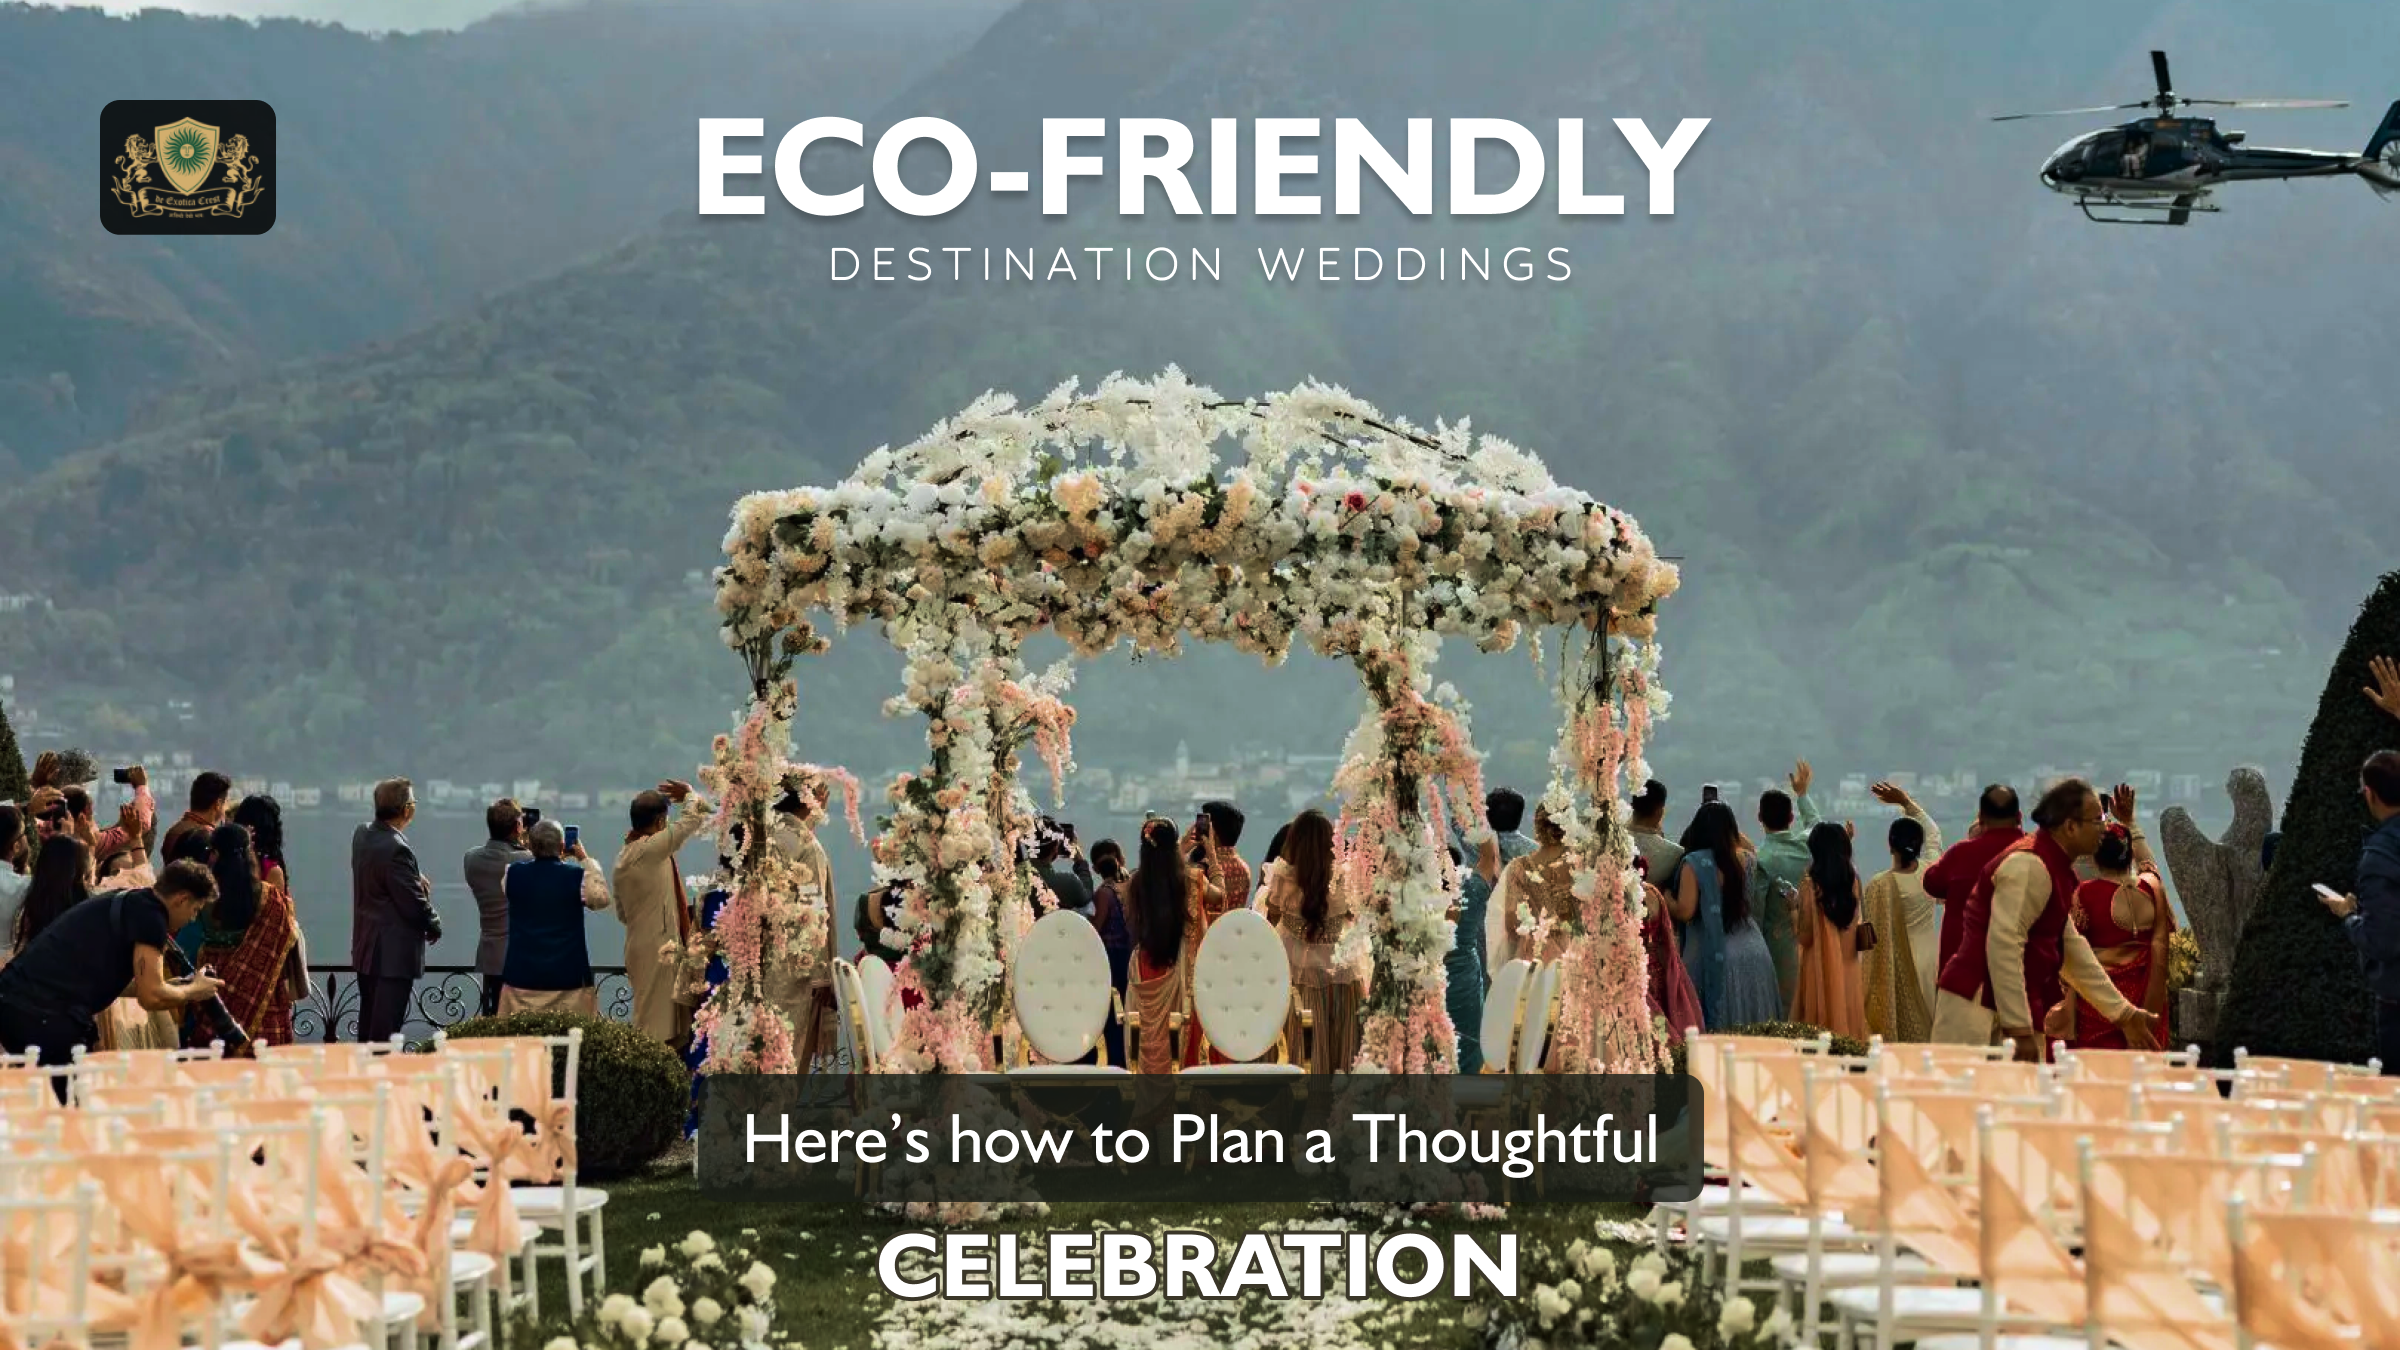 Eco-friendly Destination Weddings – Here’s how to Plan a Thoughtful Celebration